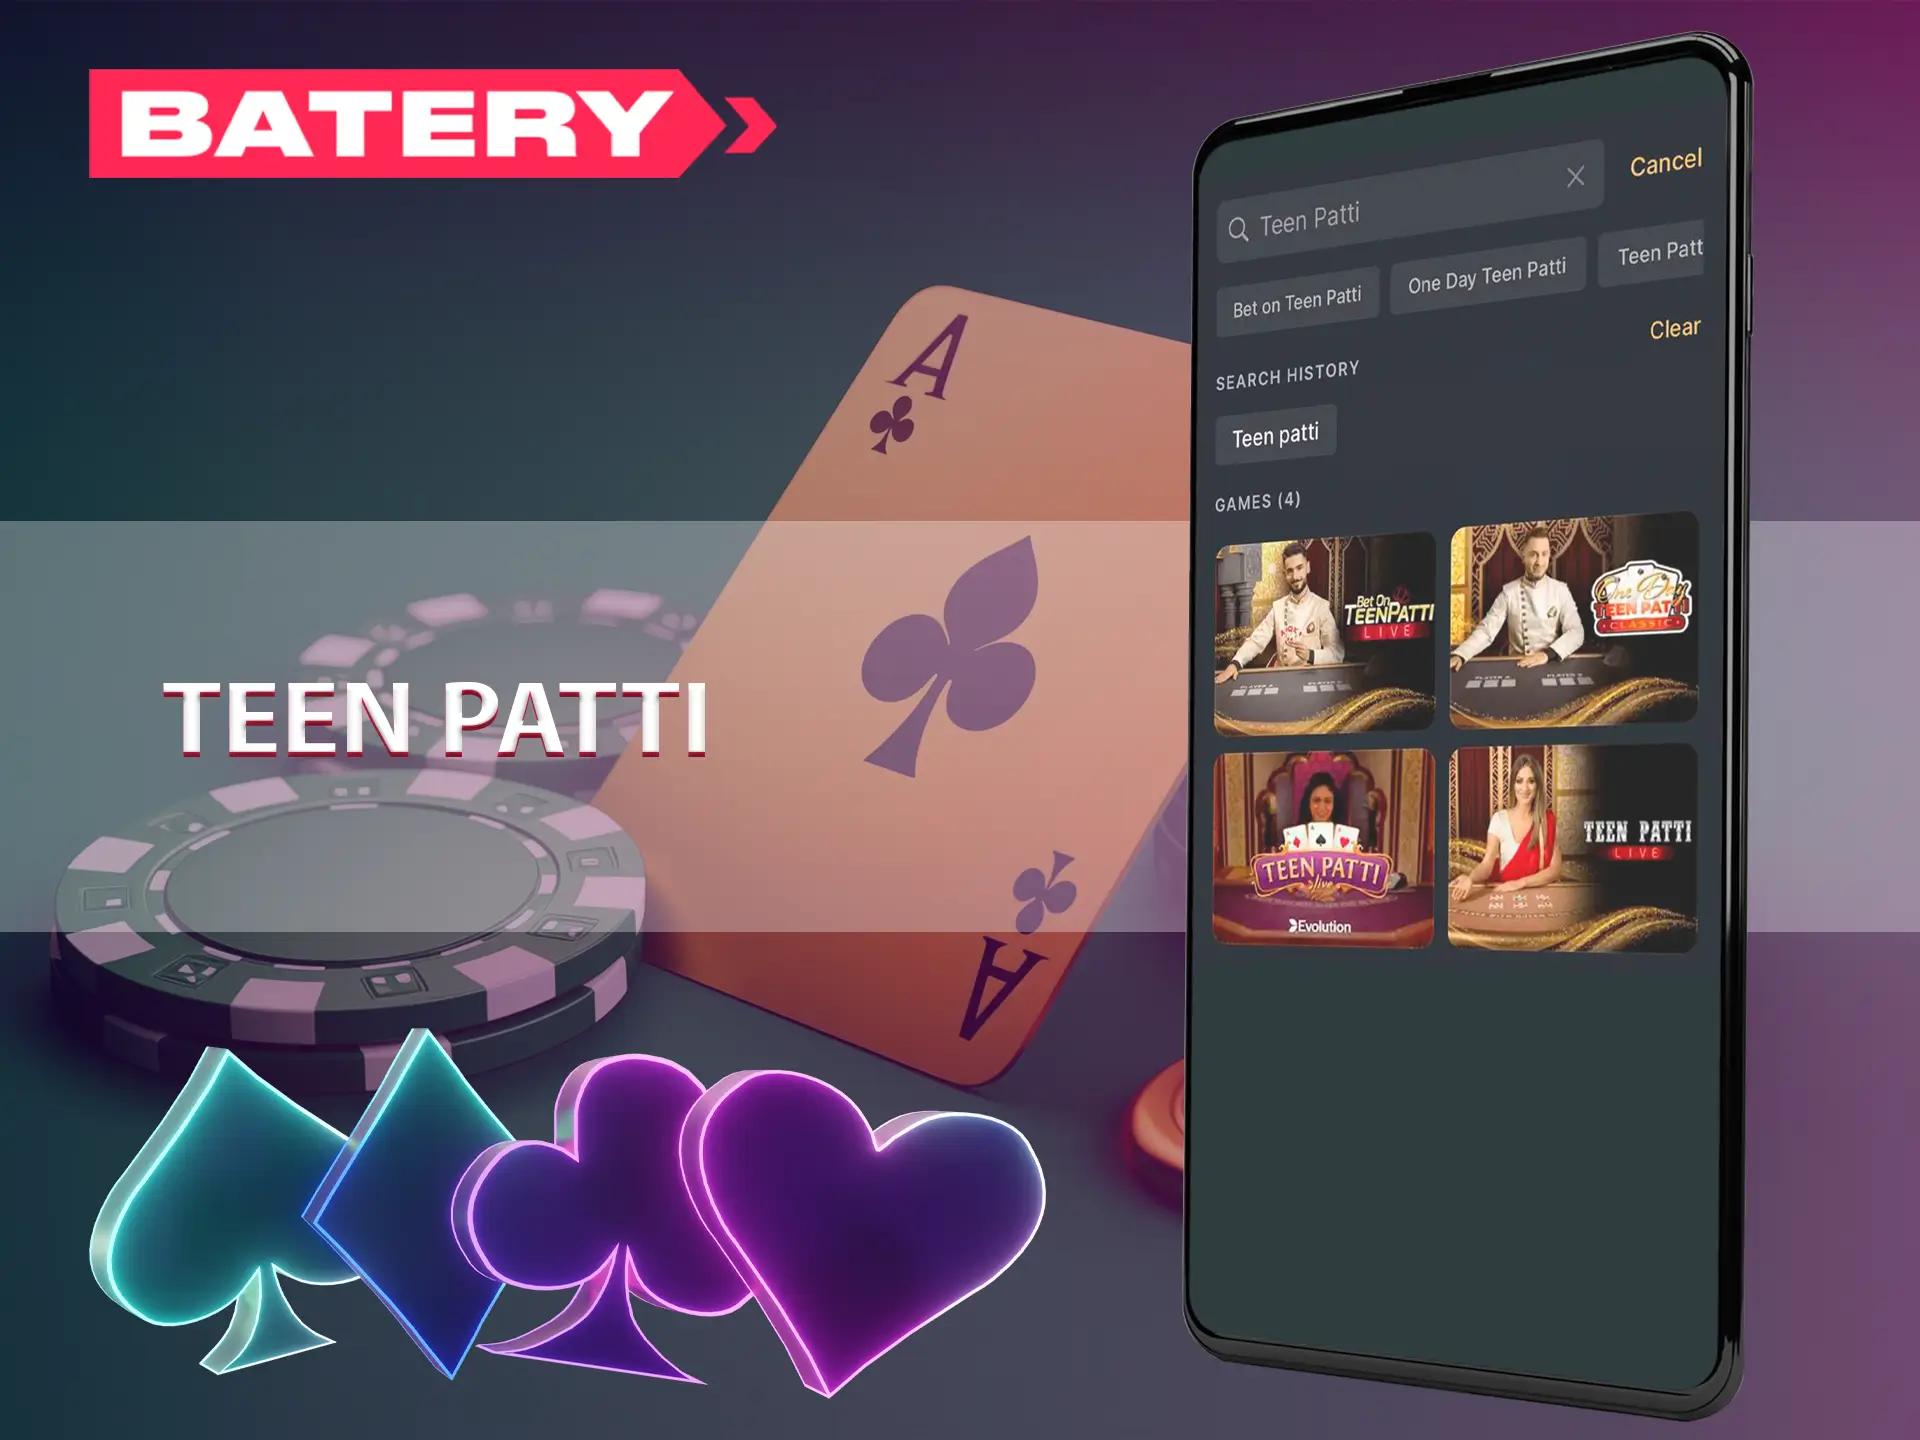 Try your luck in the Teen Patti game from Batery.